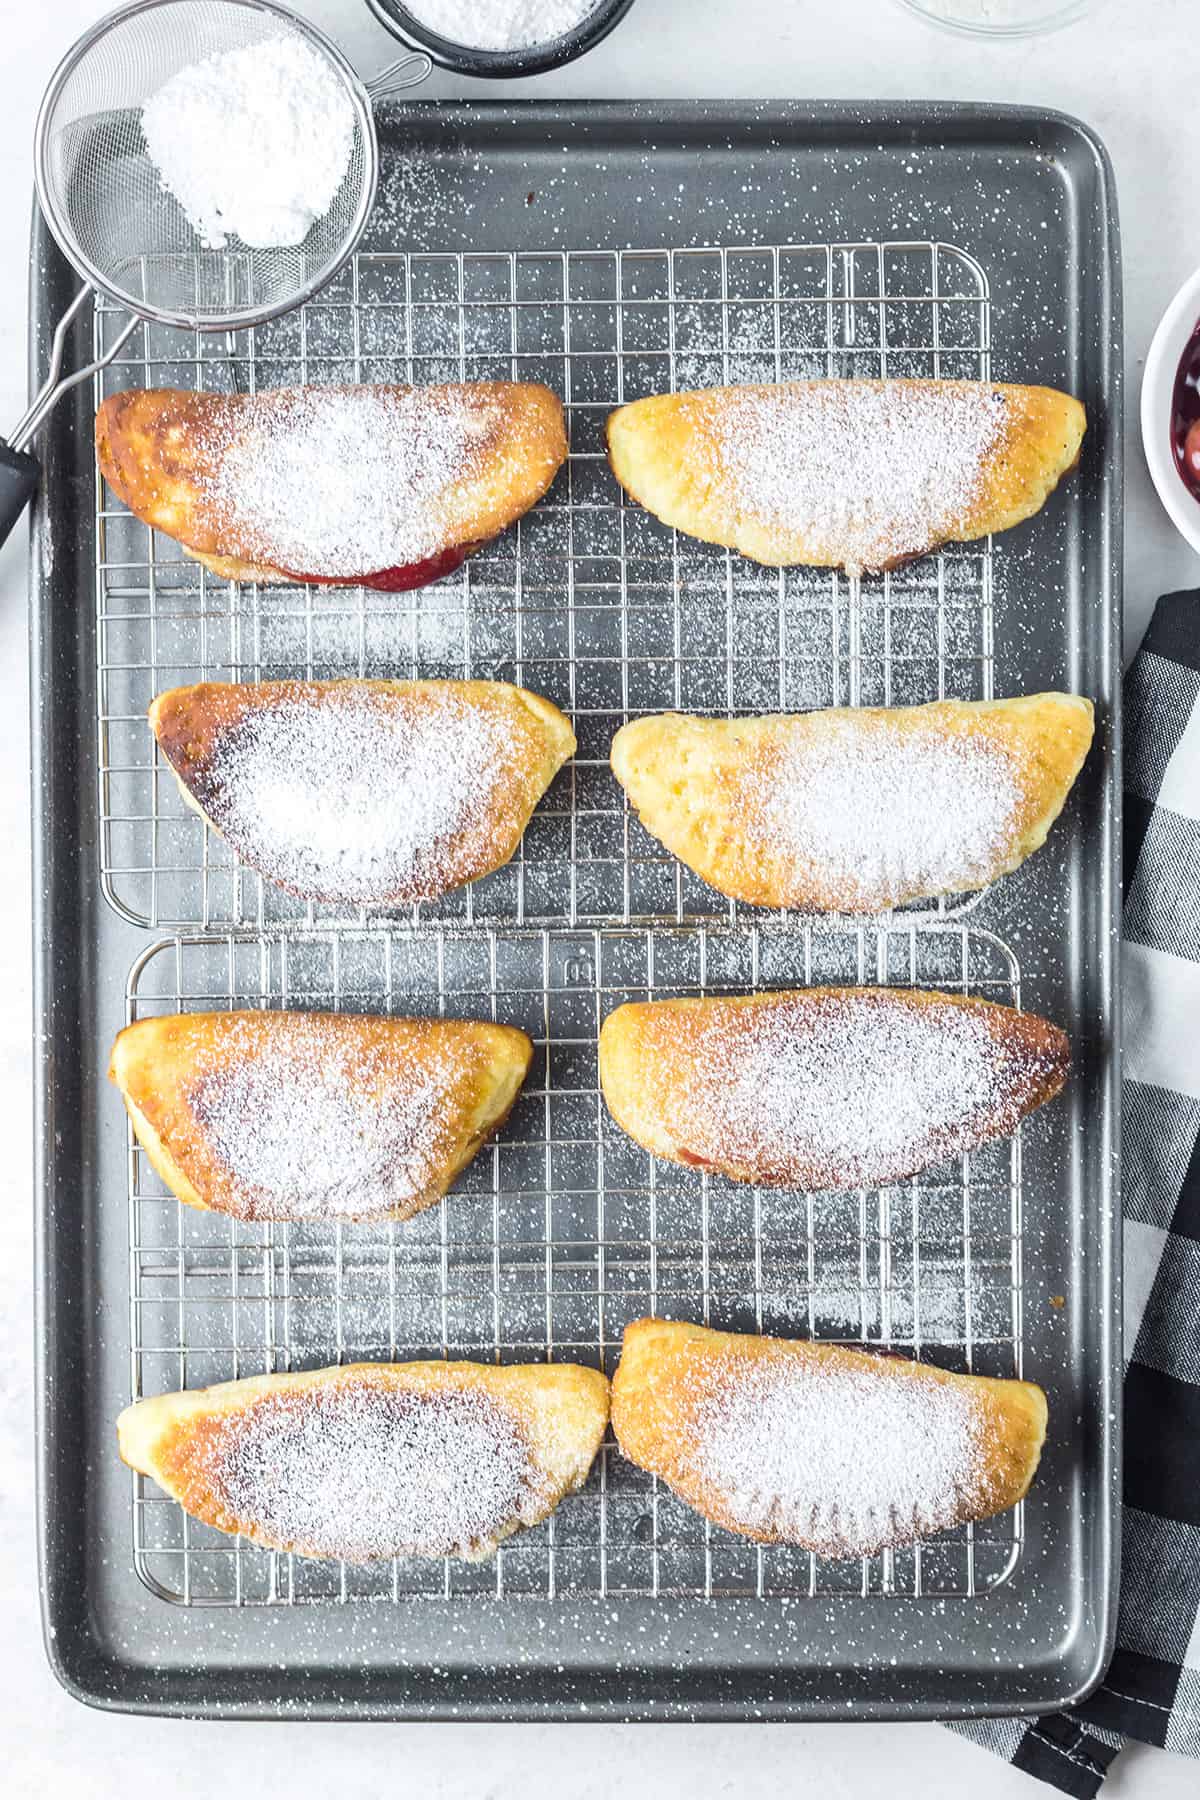 Finished fried hand pies on a wire rack.